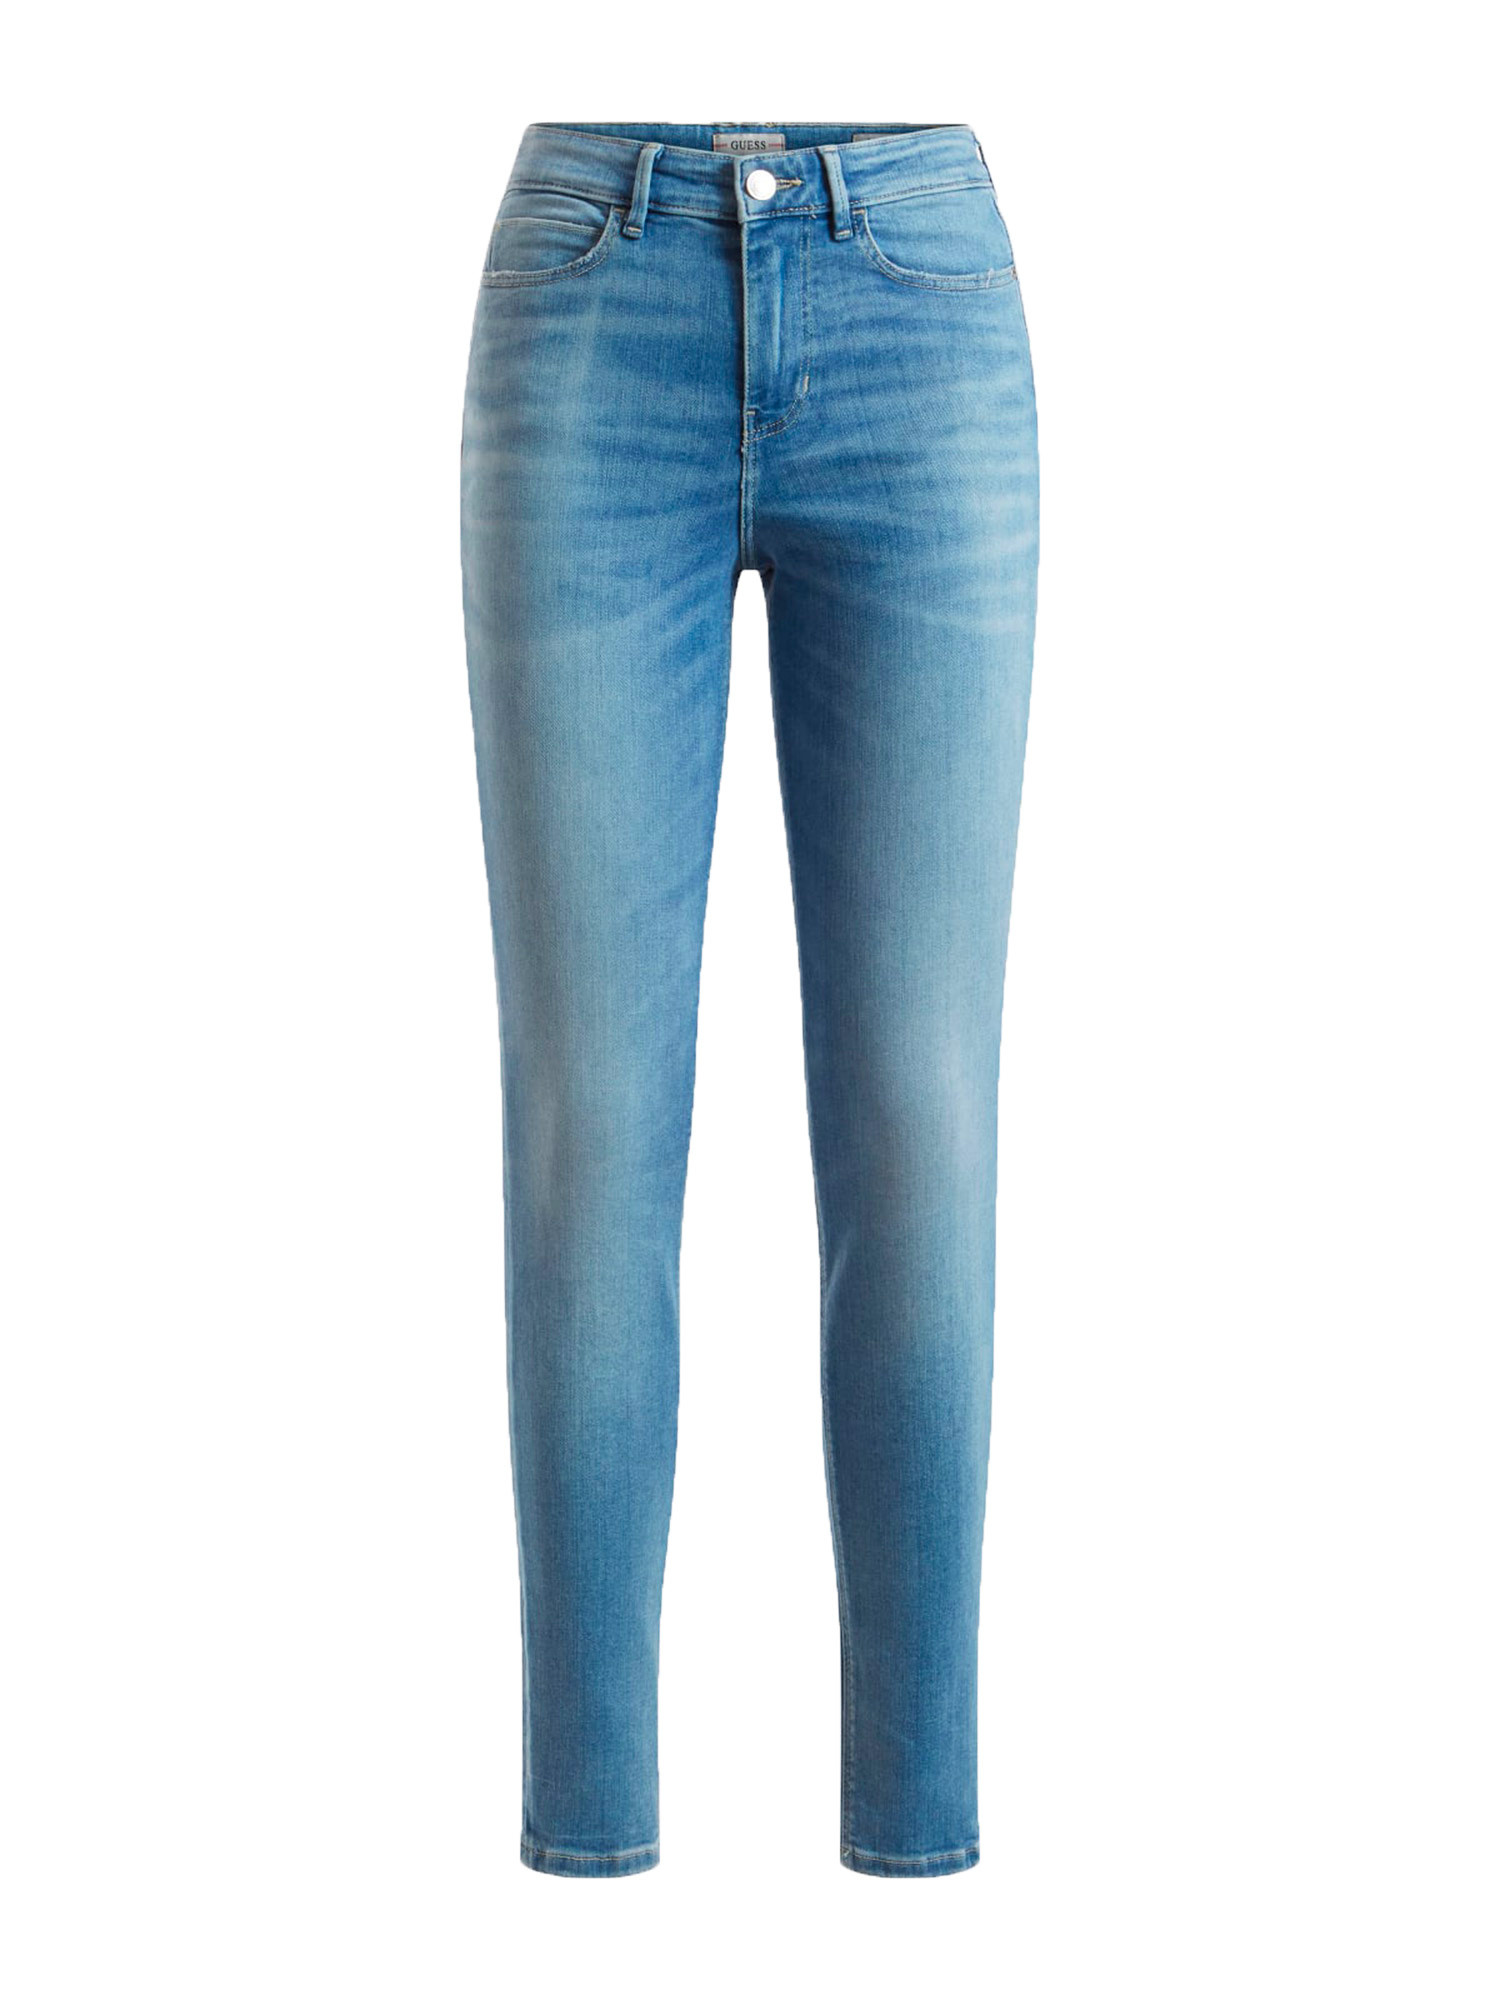 Guess - Jeans 5 tasche skinny, Azzurro, large image number 0